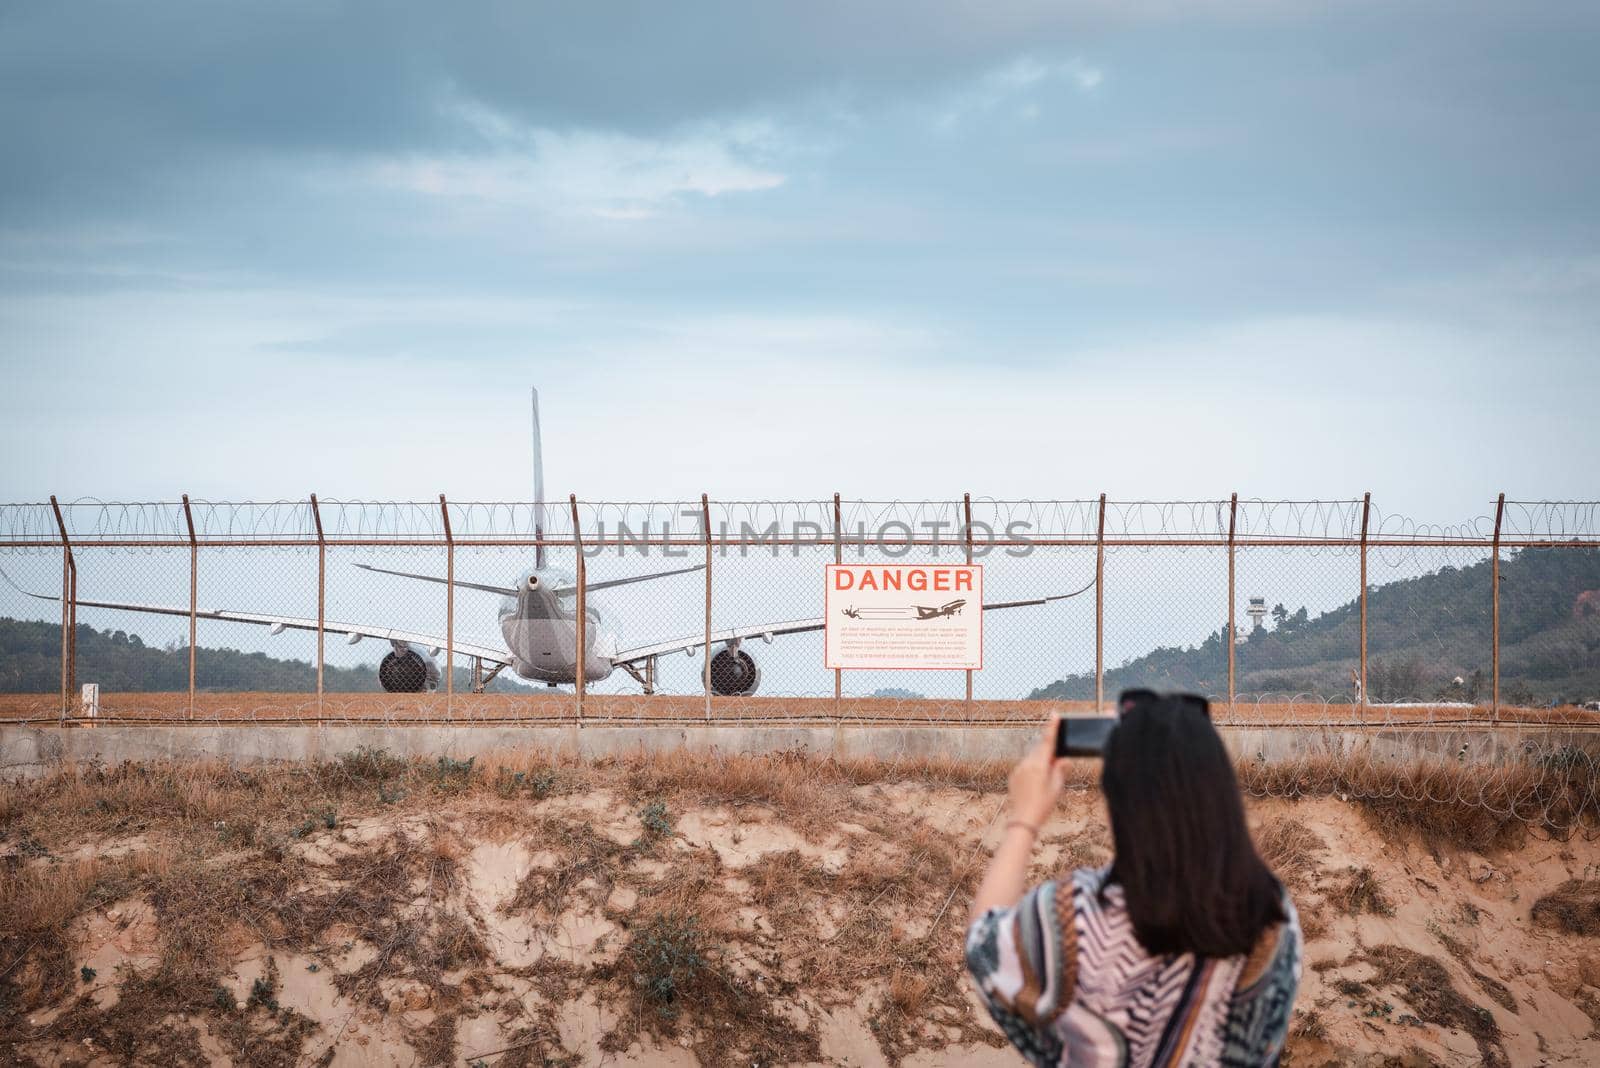 Tourist Woman is Capturing Photos The Airplane While Take off Landing on Runway Track From Outside The Airport. Asian Tourist Woman Having Fun With Photographic Vehicle Aircraft Beside Airport Fence. by MahaHeang245789